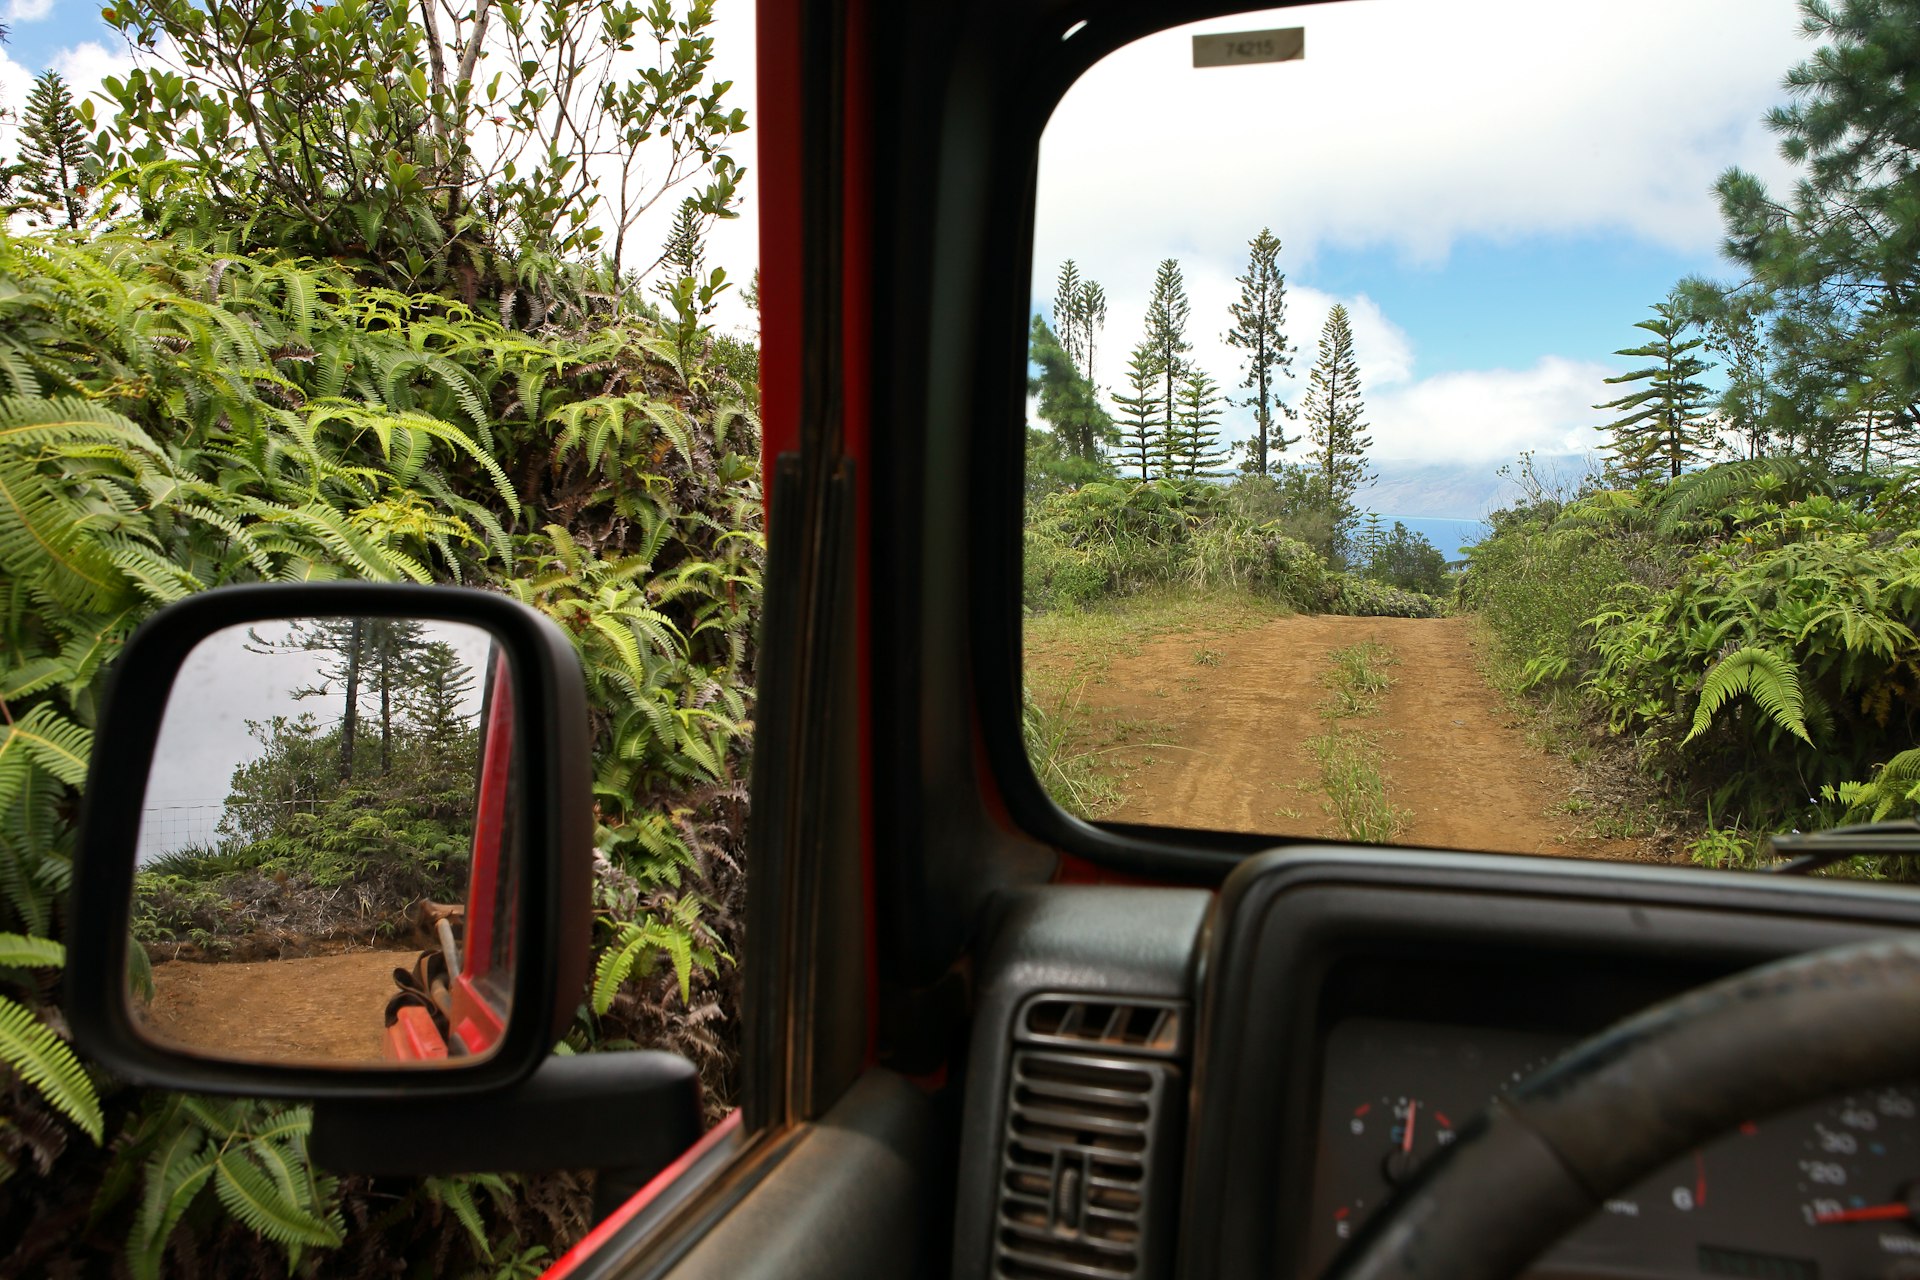 The Munro Trail from the inside of a Jeep; Munro Trail, Lana‘i, Hawaii